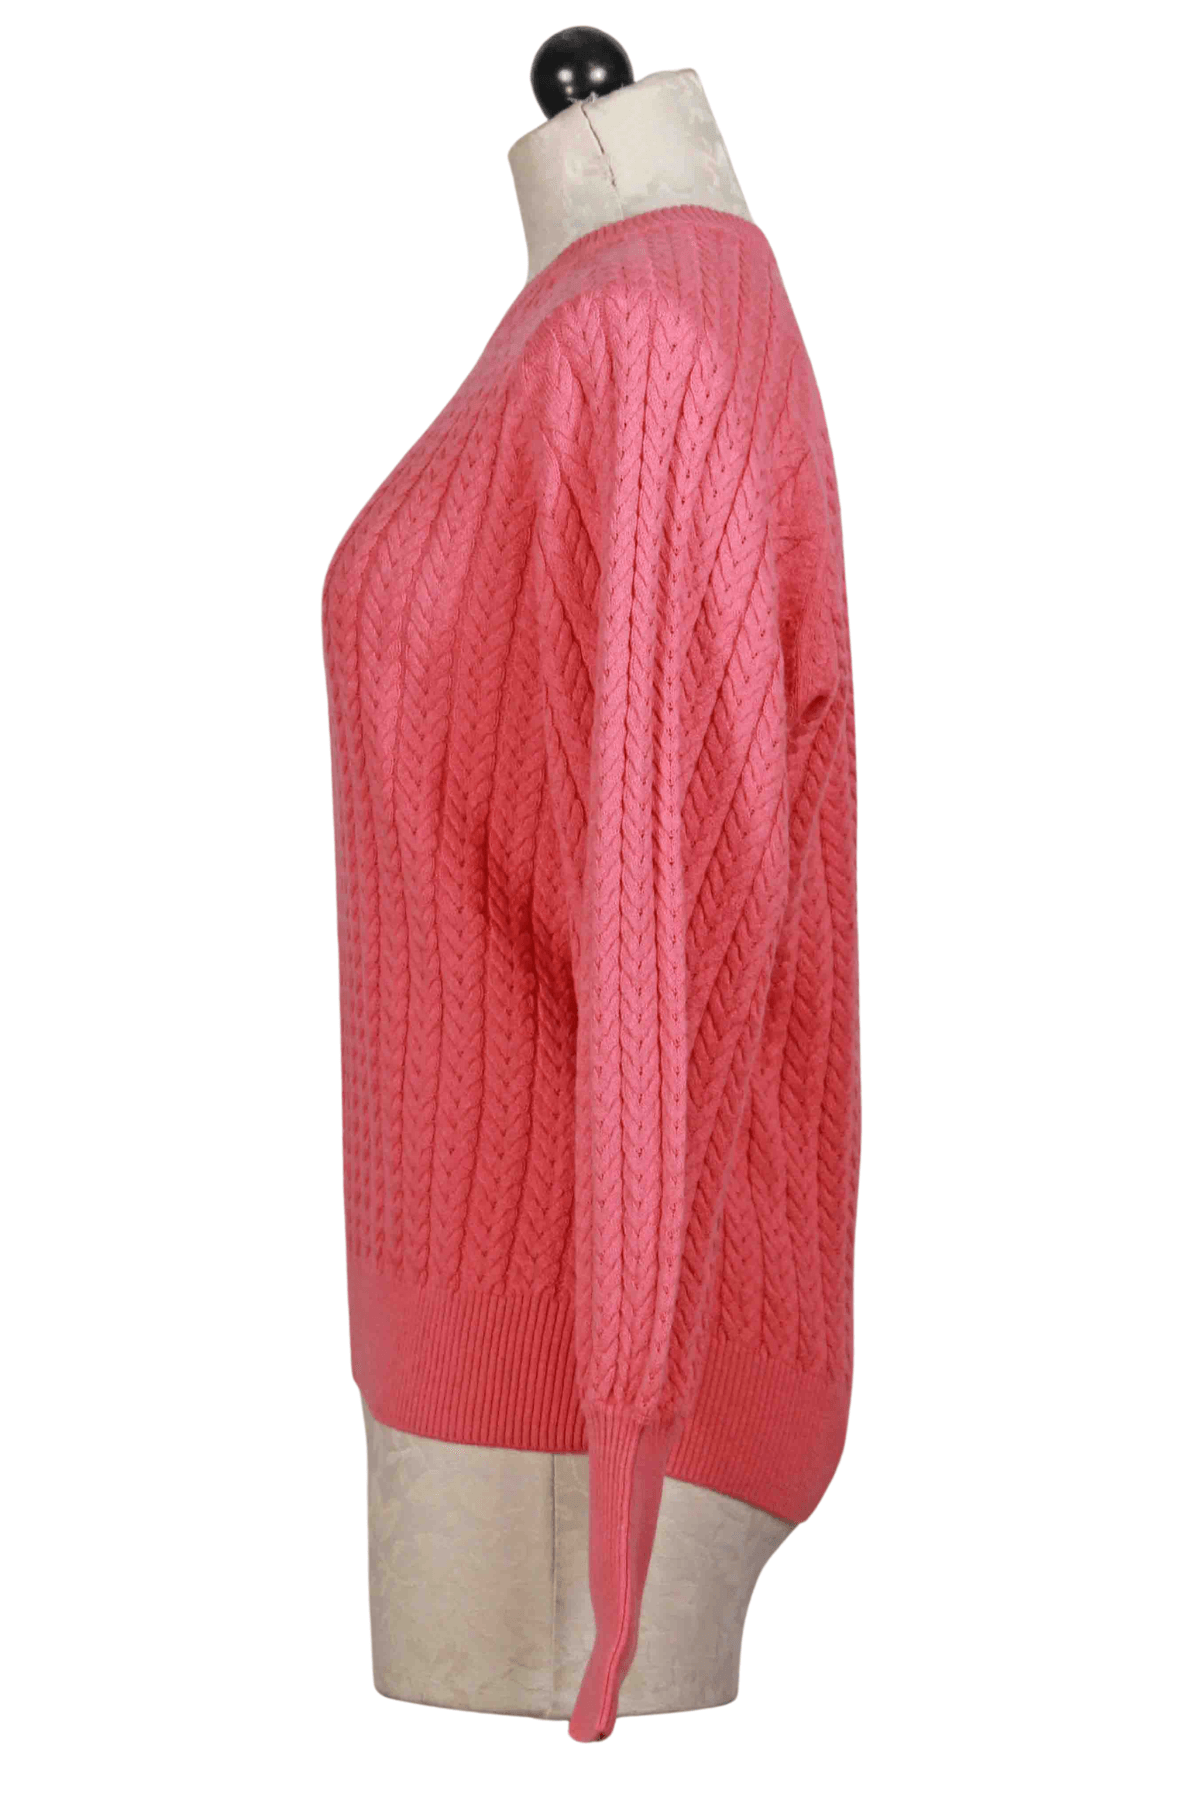 side view of Flamingo Plume Thilda Pullover Sweater by Part Two